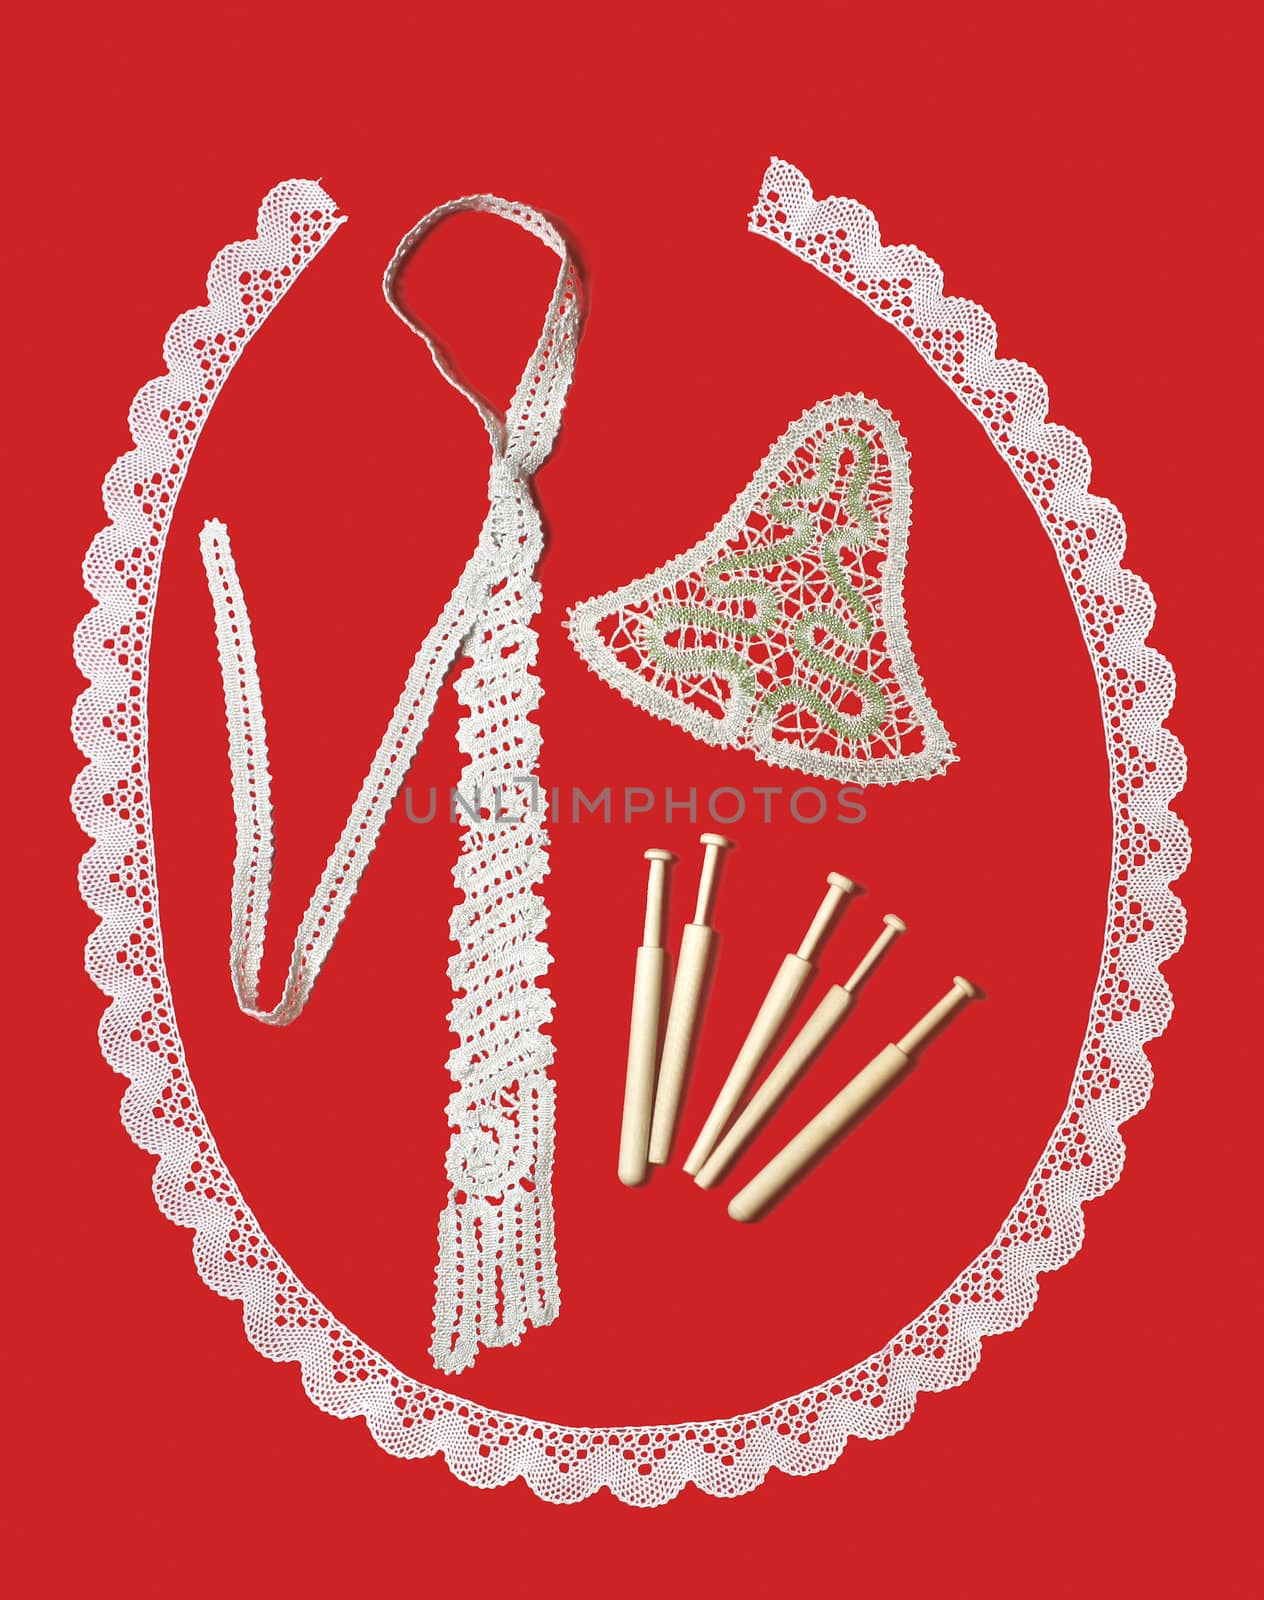 embroidery of the products: tie, campanula, instrument, adjustment, lace